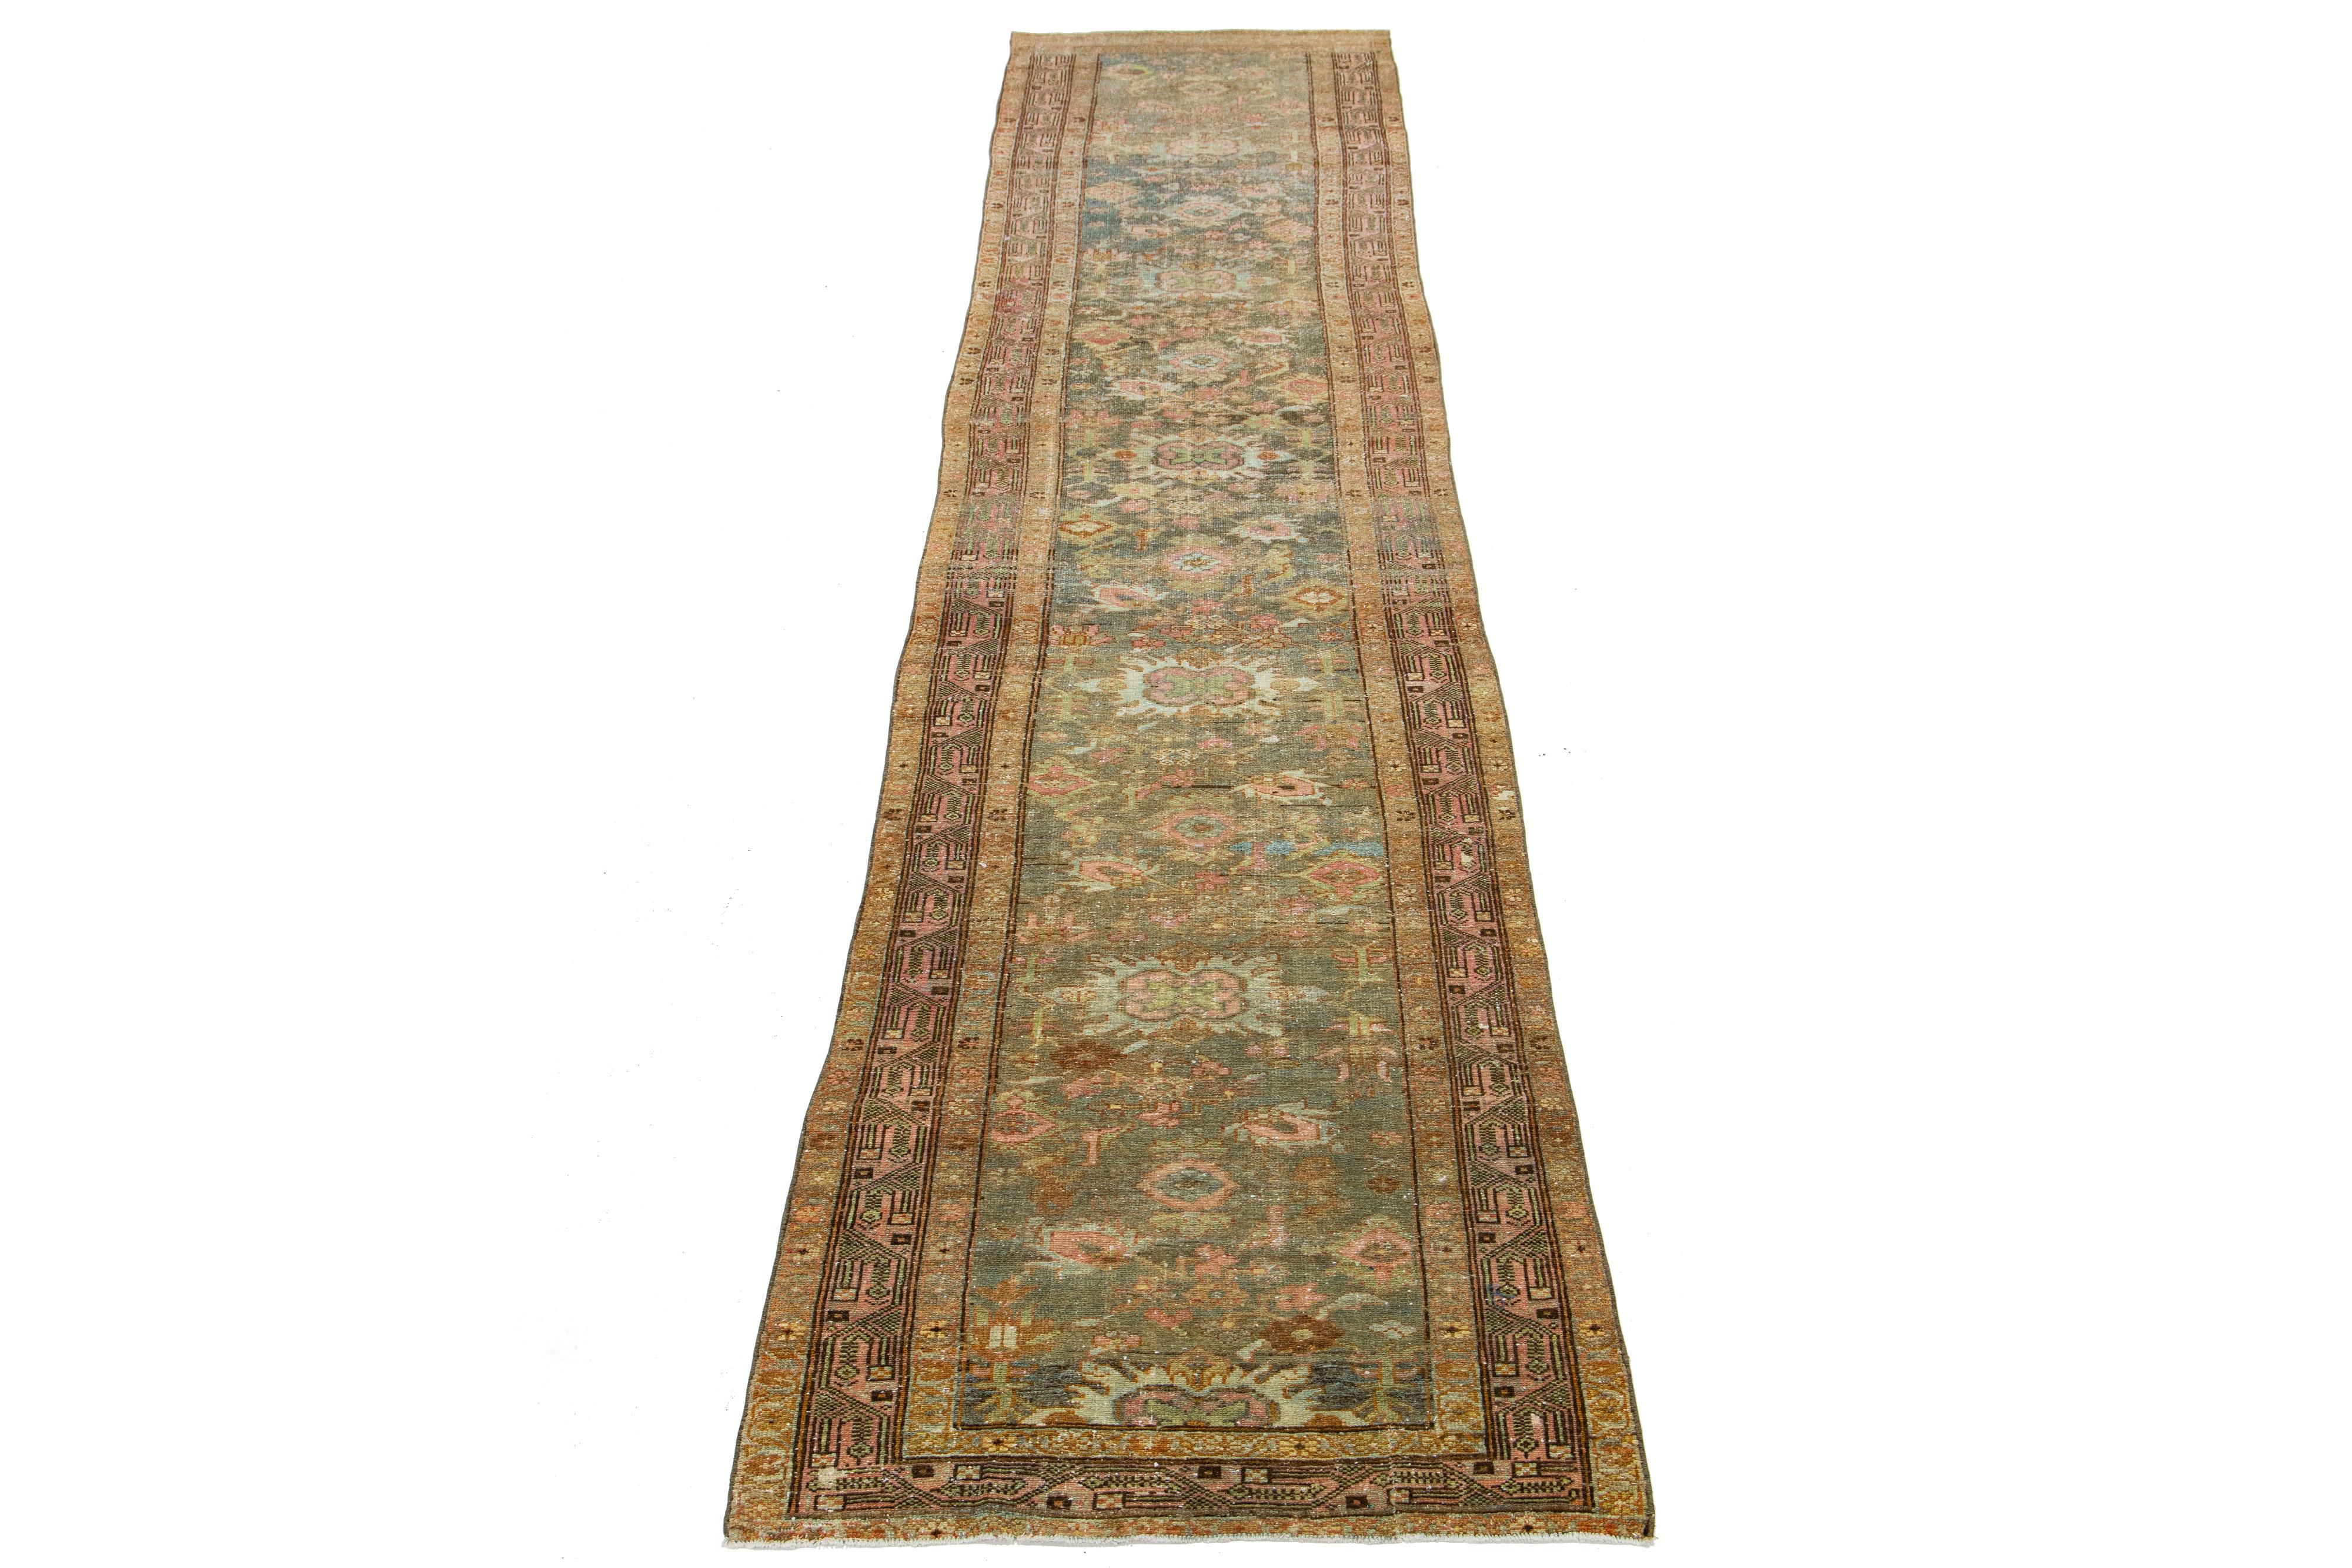 Beautiful antique Lilihan hand-knotted wool with a blue field. This Persian has pink borders with an all-over floral pattern design in brown and beige accents. 

This rug measures 3'1